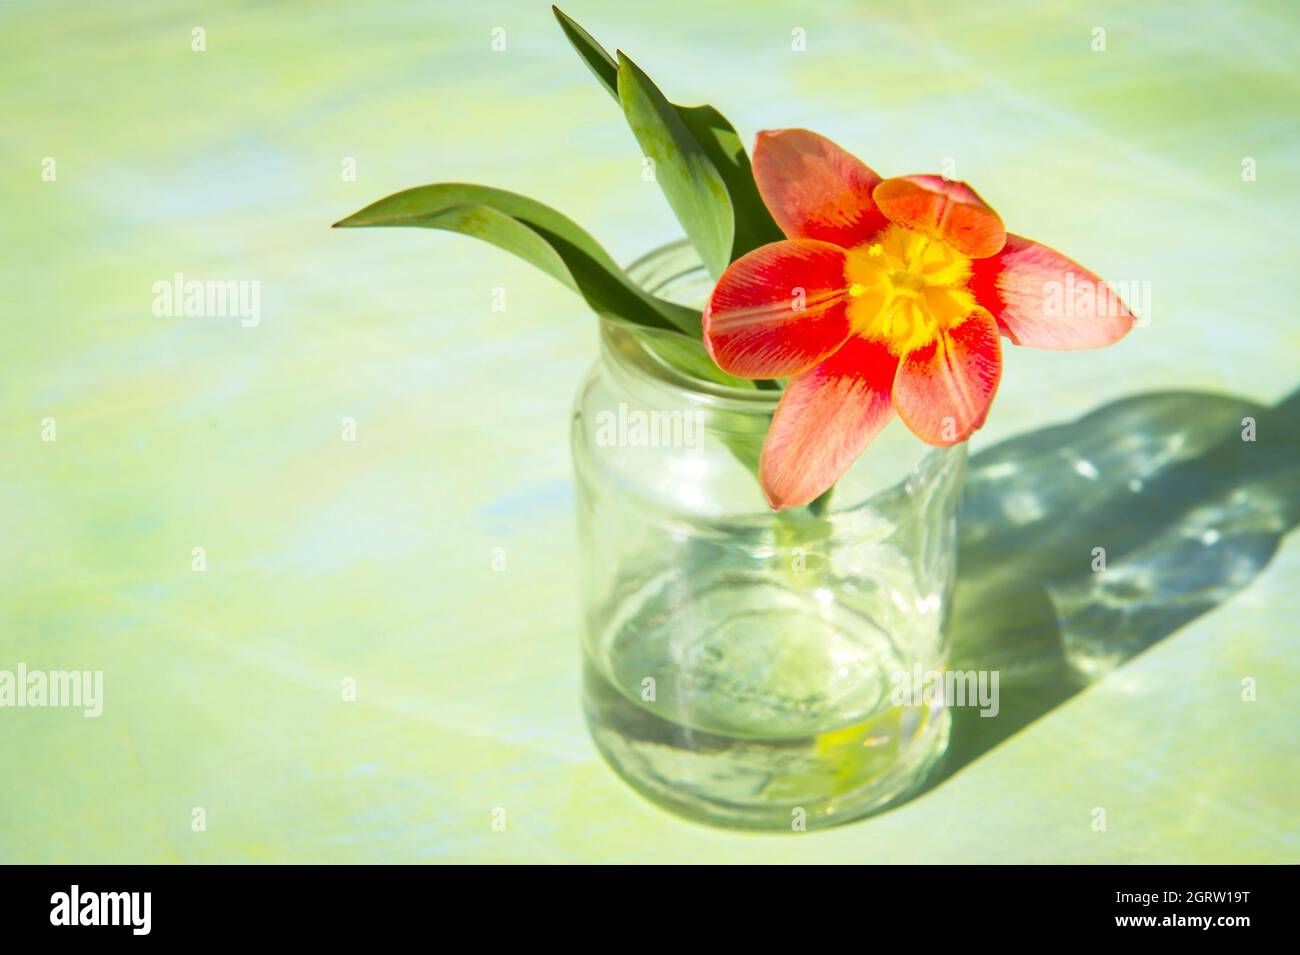 Close-up Of Flower In Glass On Table Stock Photo